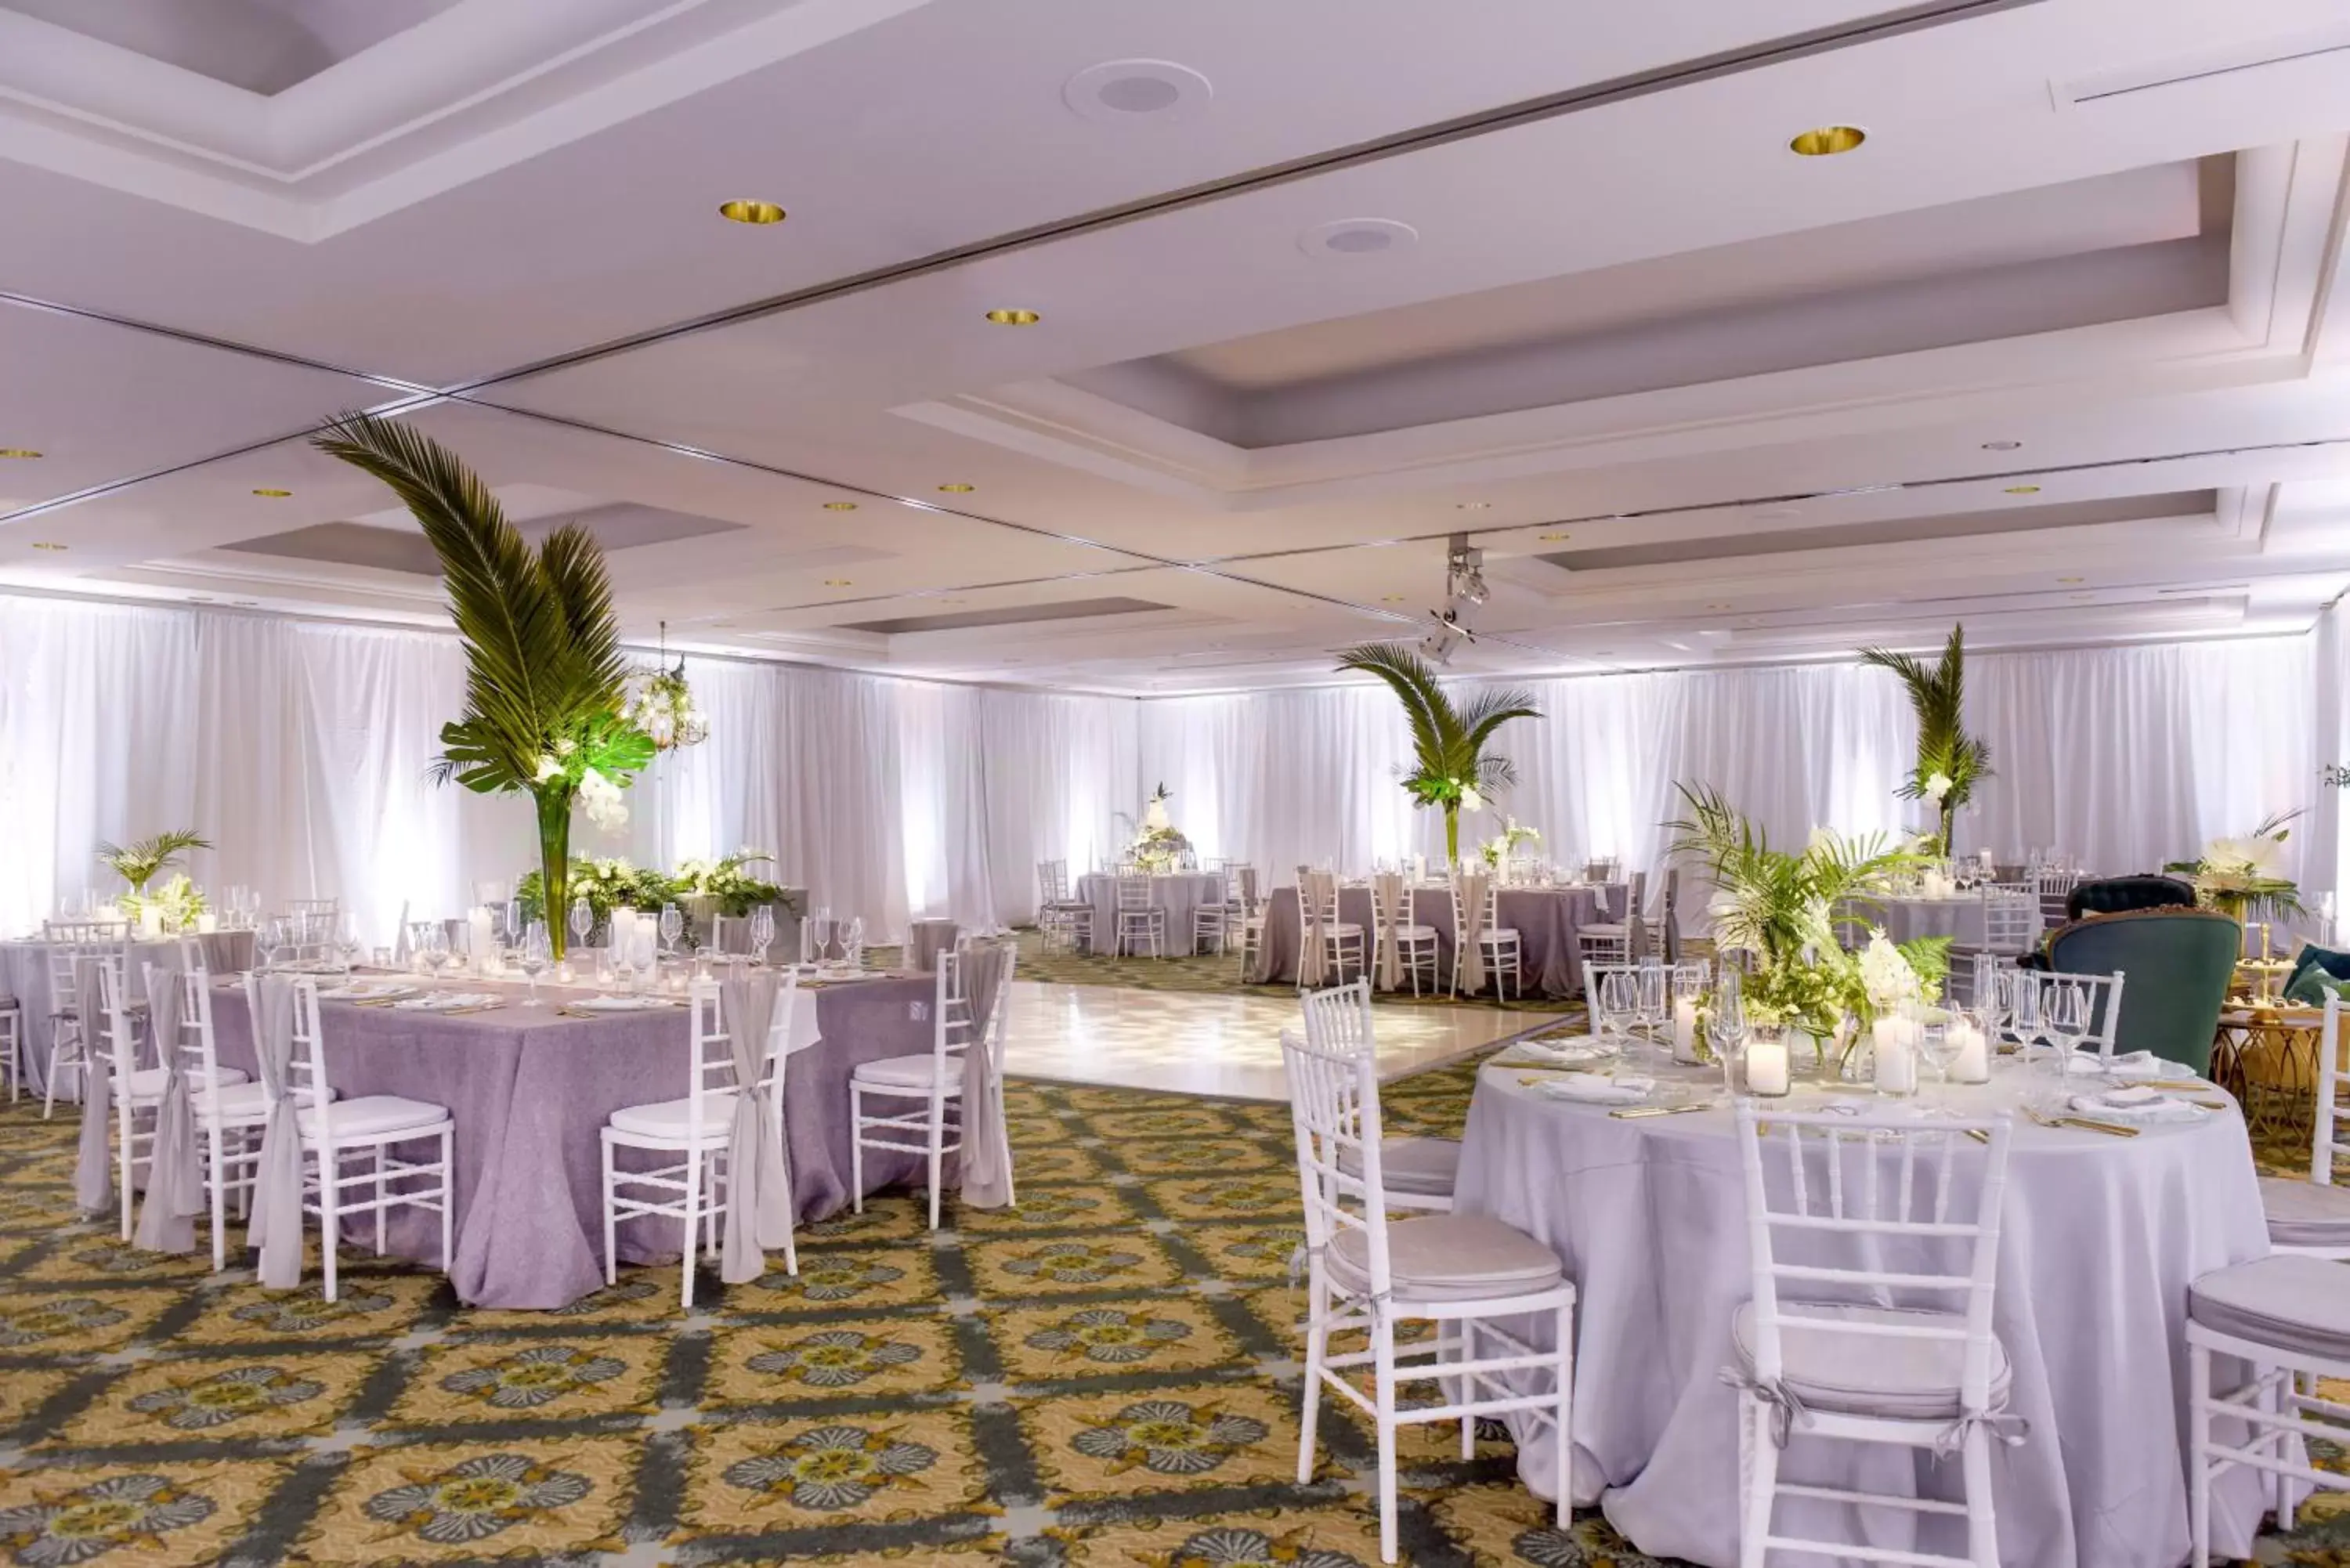 Banquet/Function facilities, Banquet Facilities in The Cliffs Hotel and Spa